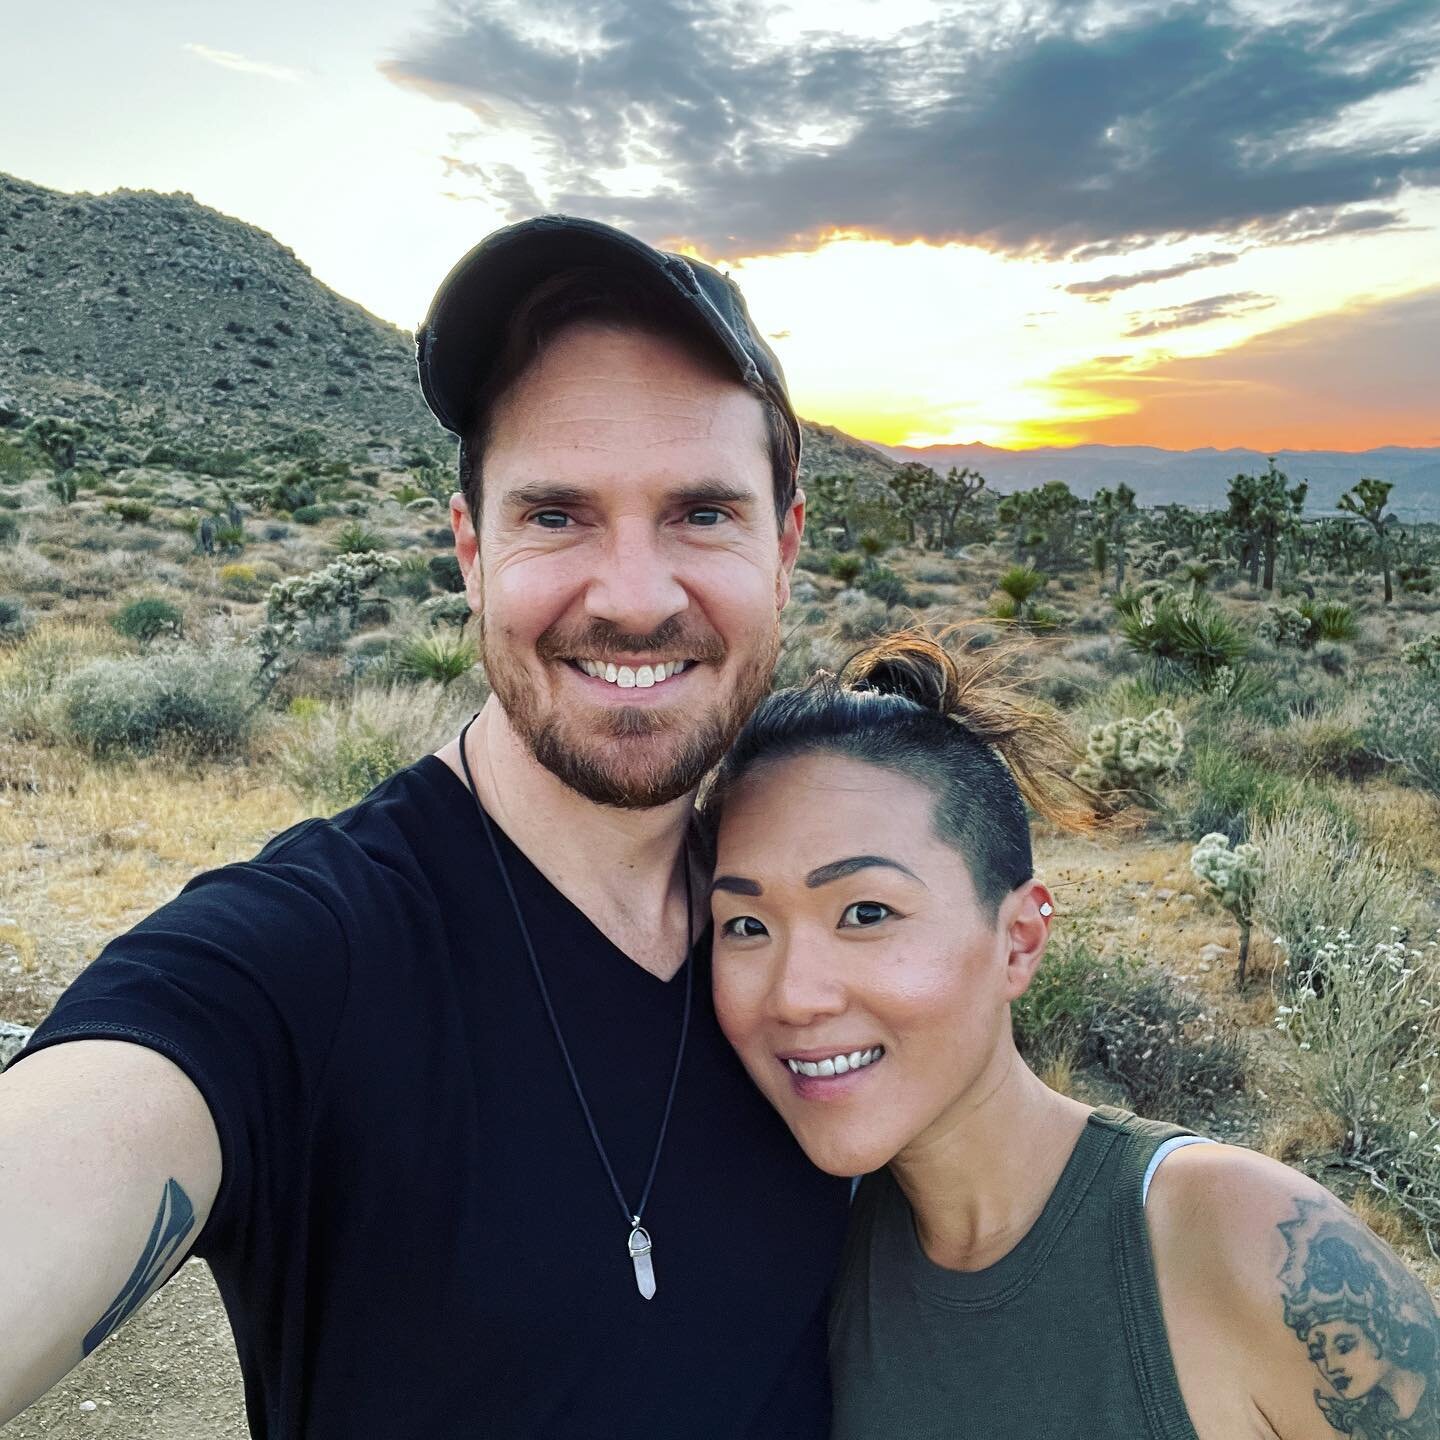 ❤️ Had such a lovely time last week with the beautiful @freedewi for a writing retreat in Joshua Tree followed by an enchanted evening at The Magic Castle. Sayang, thank you for being the amazing, genius, loving, generous, and gorgeous person that yo